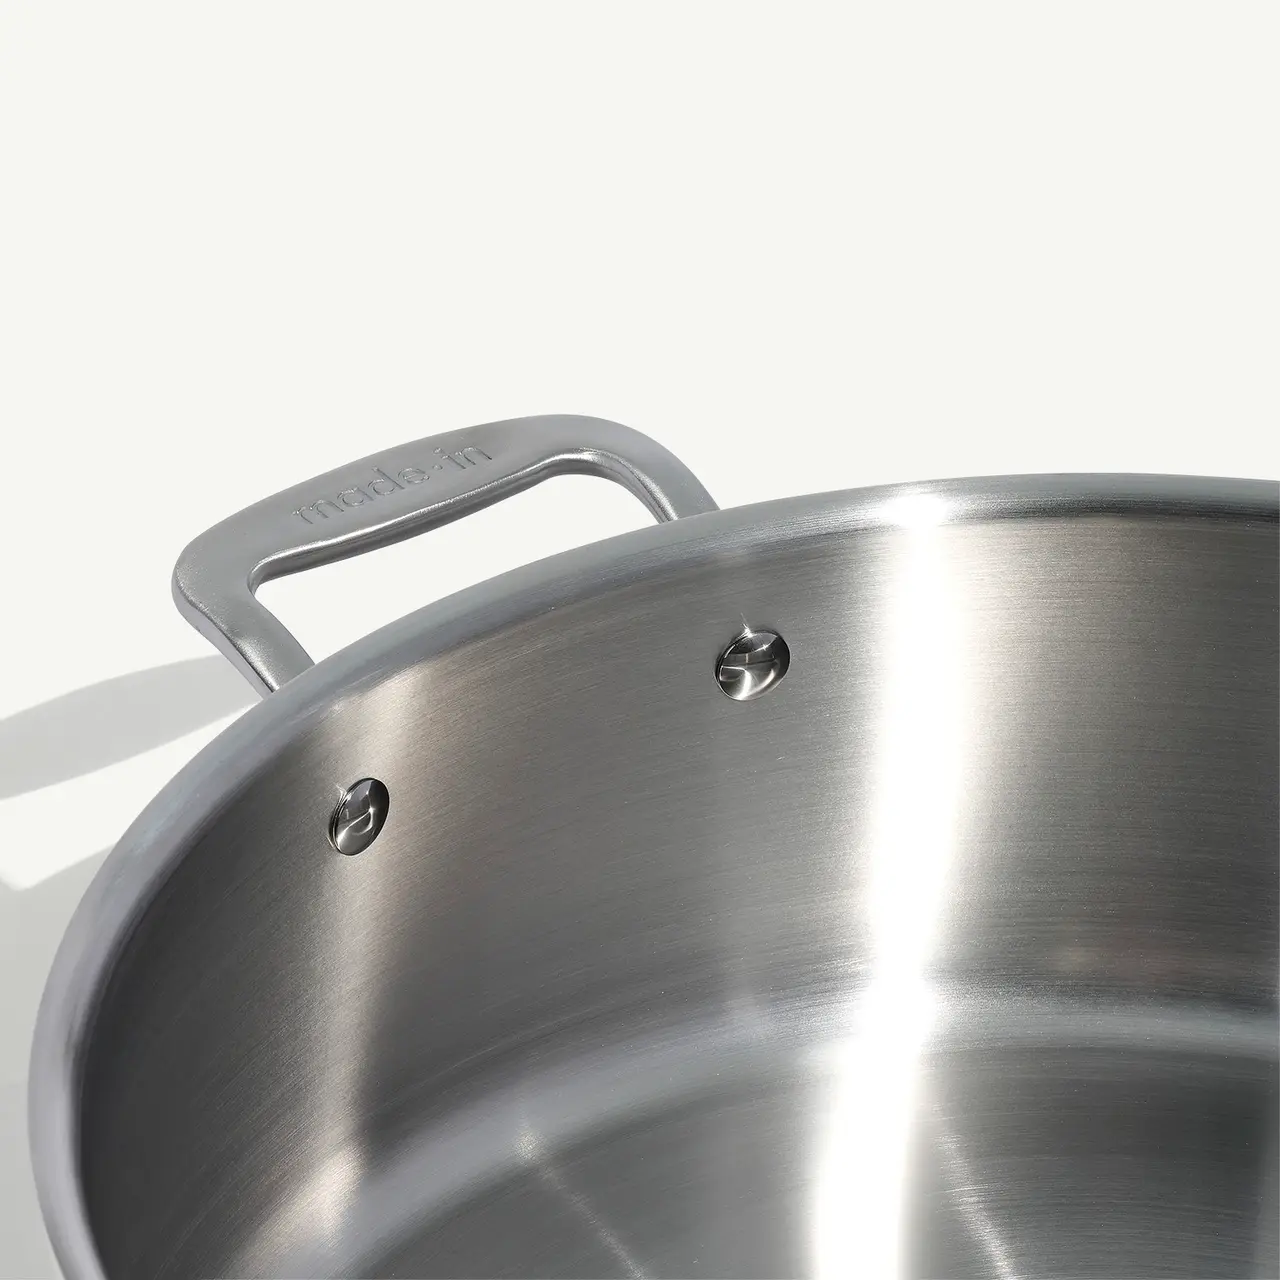 A close-up view of a stainless steel pot with its riveted handle visible against a neutral background.